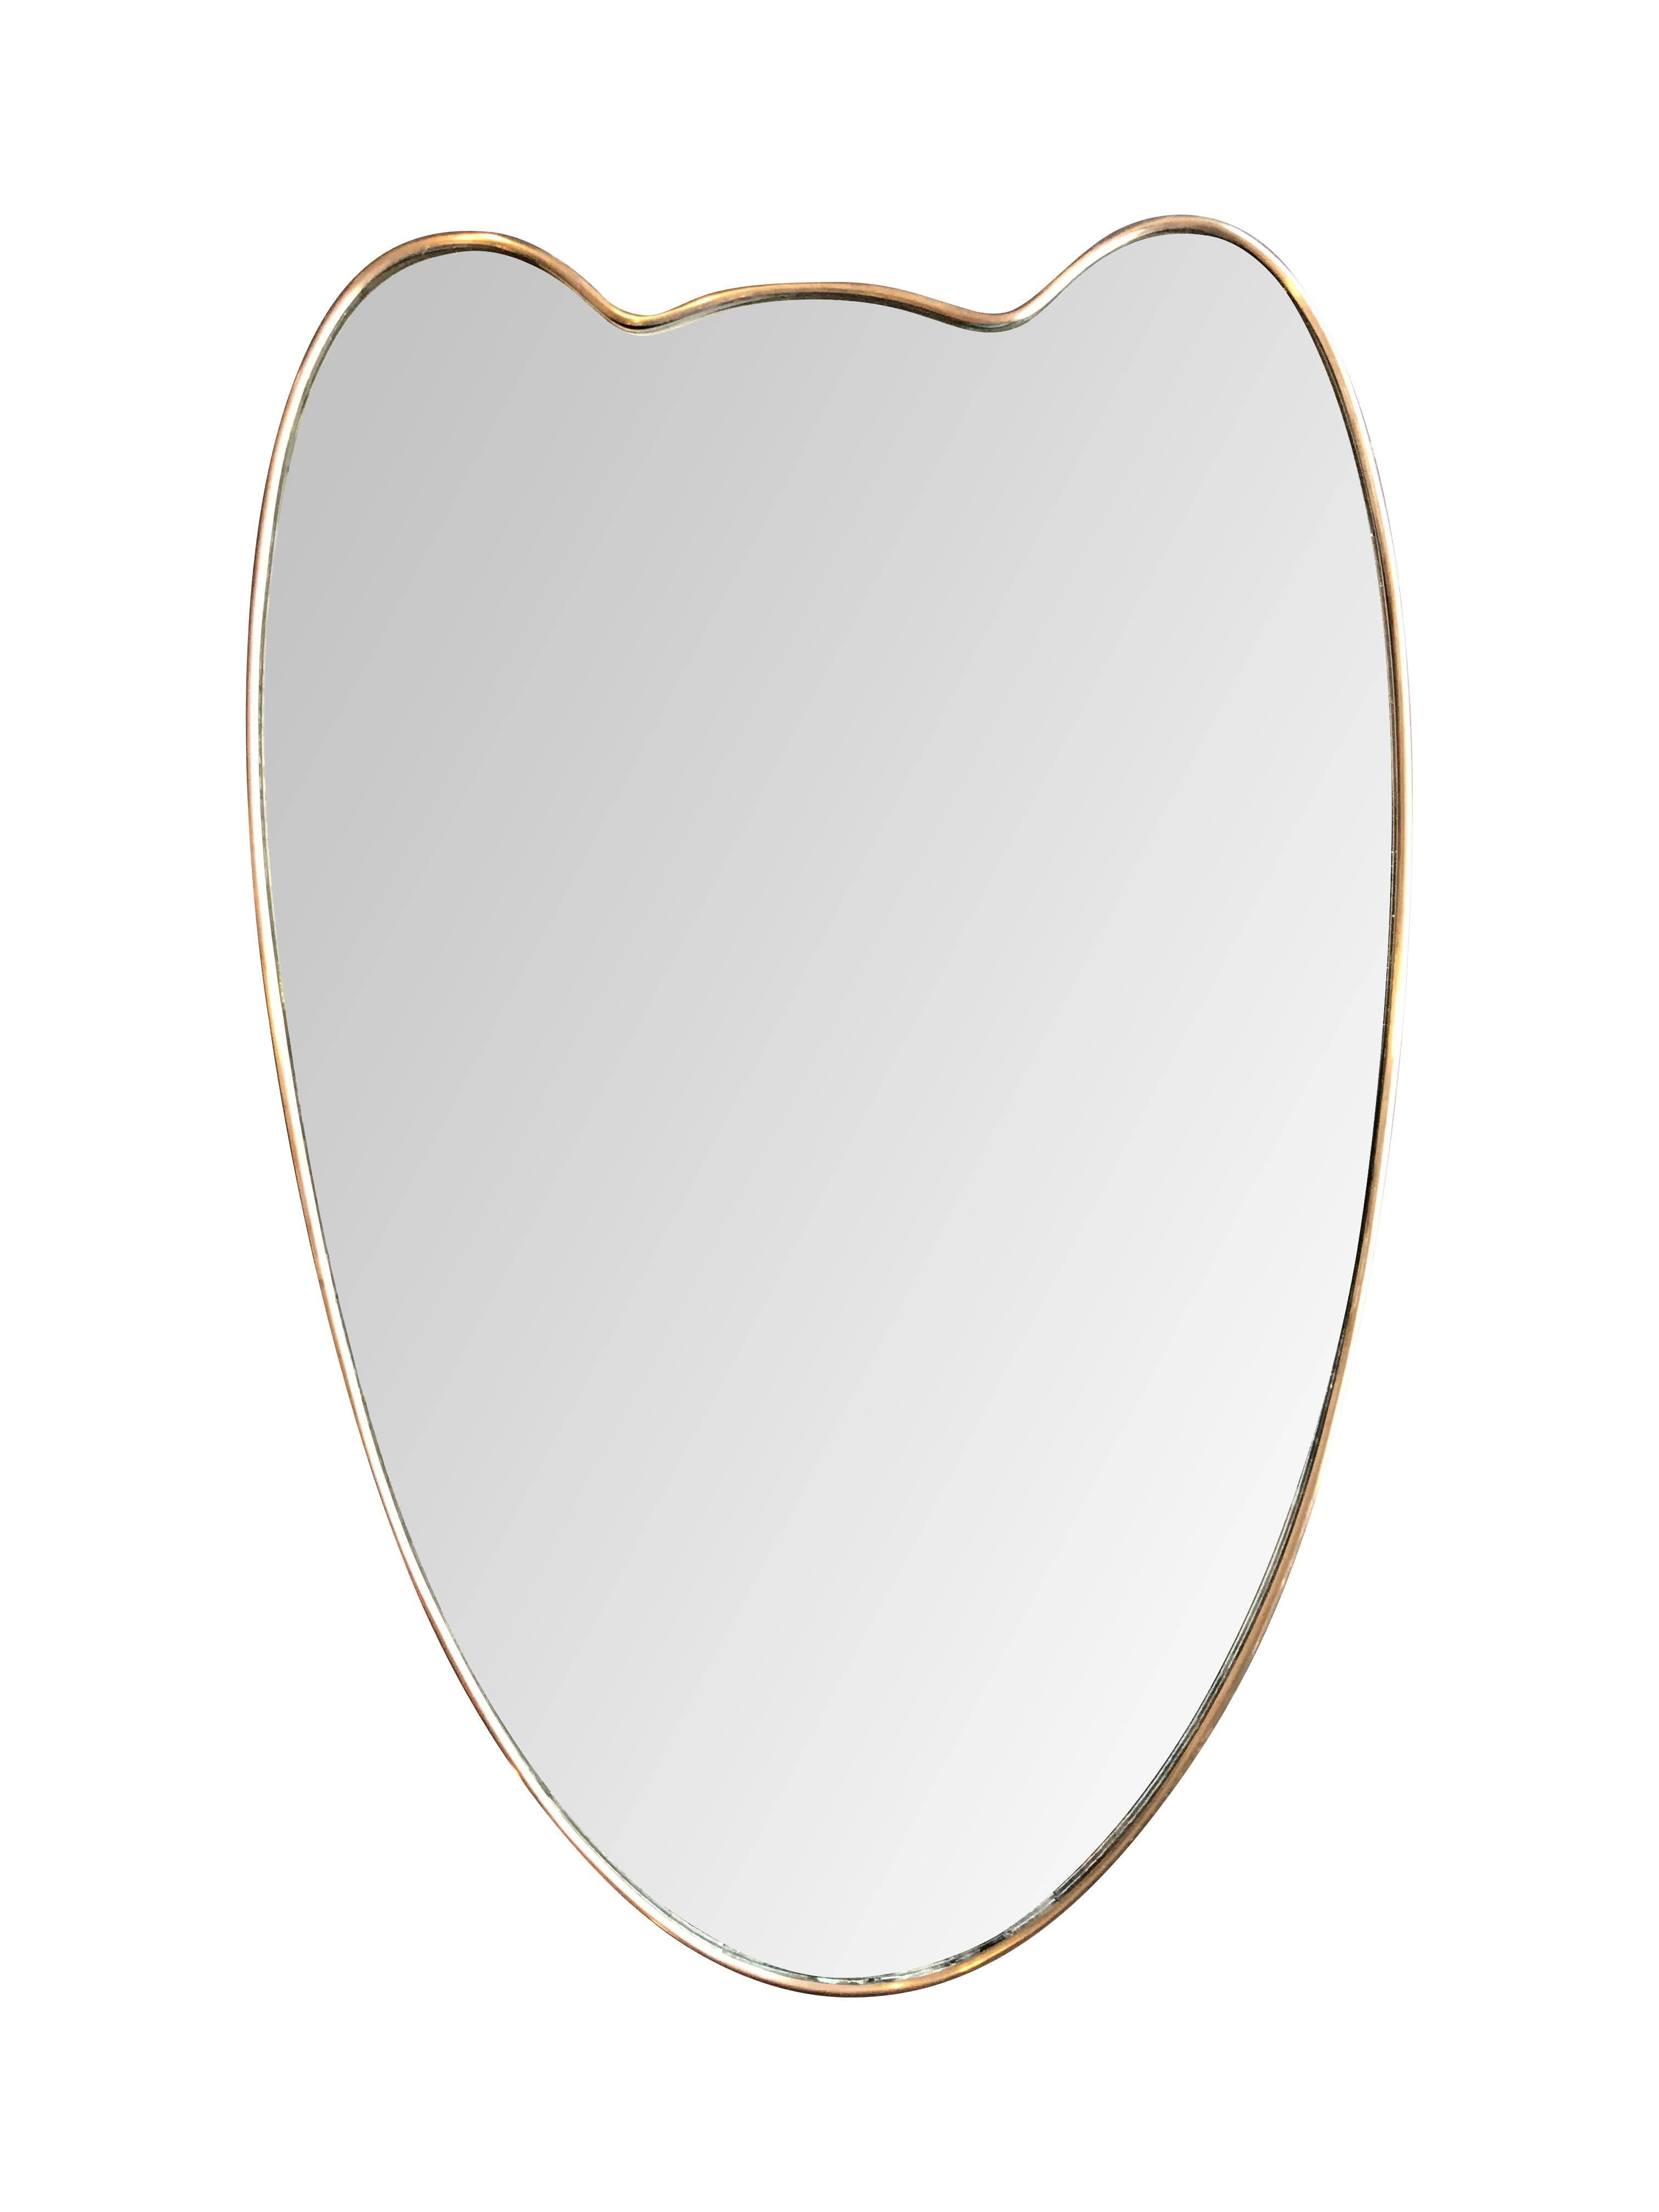 An Italian shield mirror with brass frame and solid wood back. Slight foxing on the original mirror consistent with age.